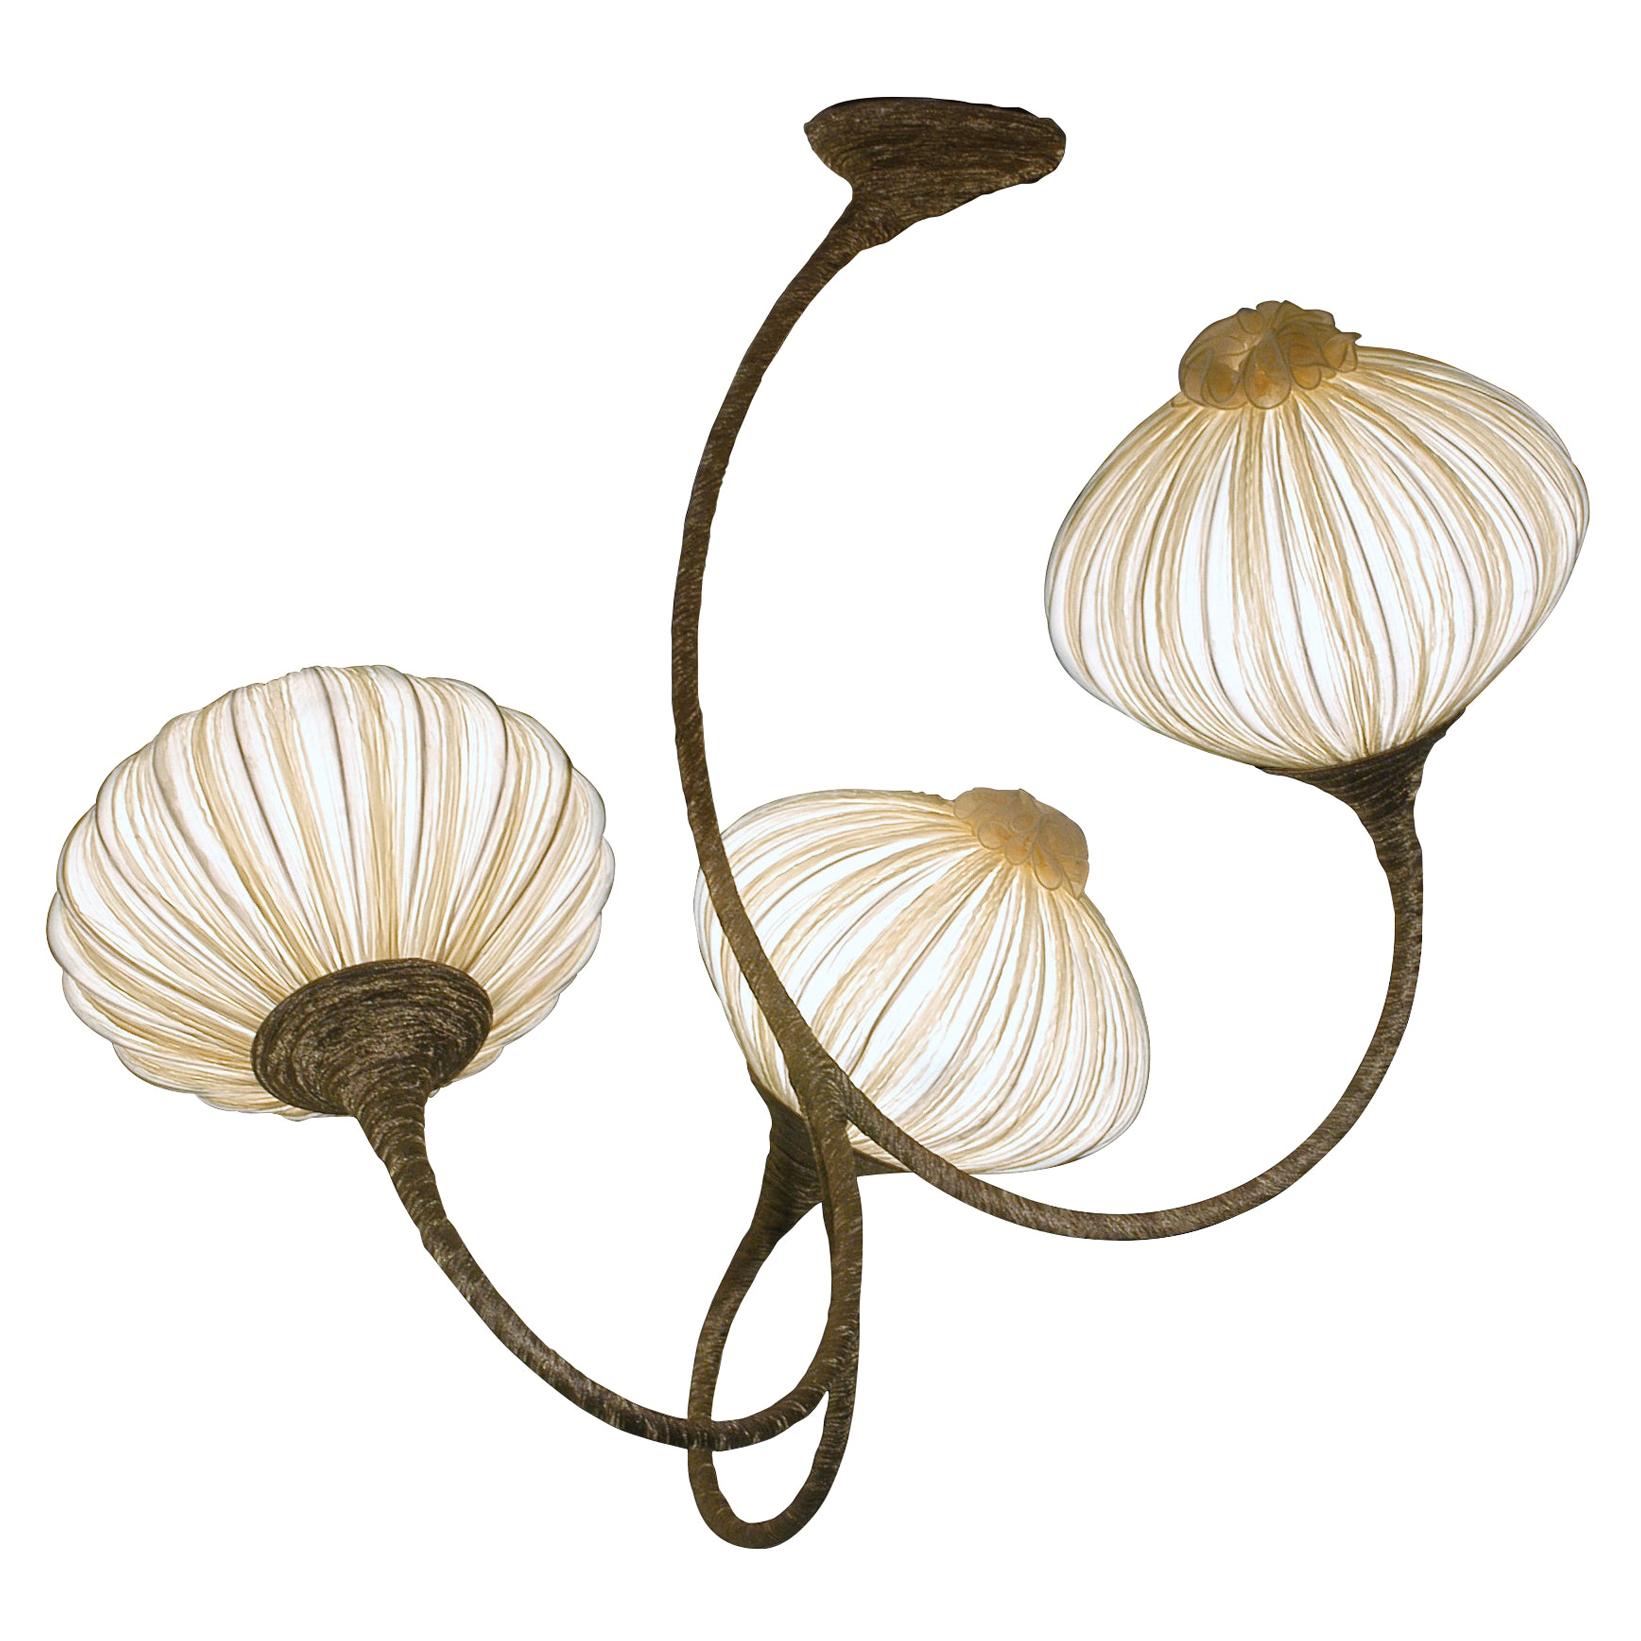 Silk and Organza over Metal "3 Palms" Chandelier by Aqua Creations